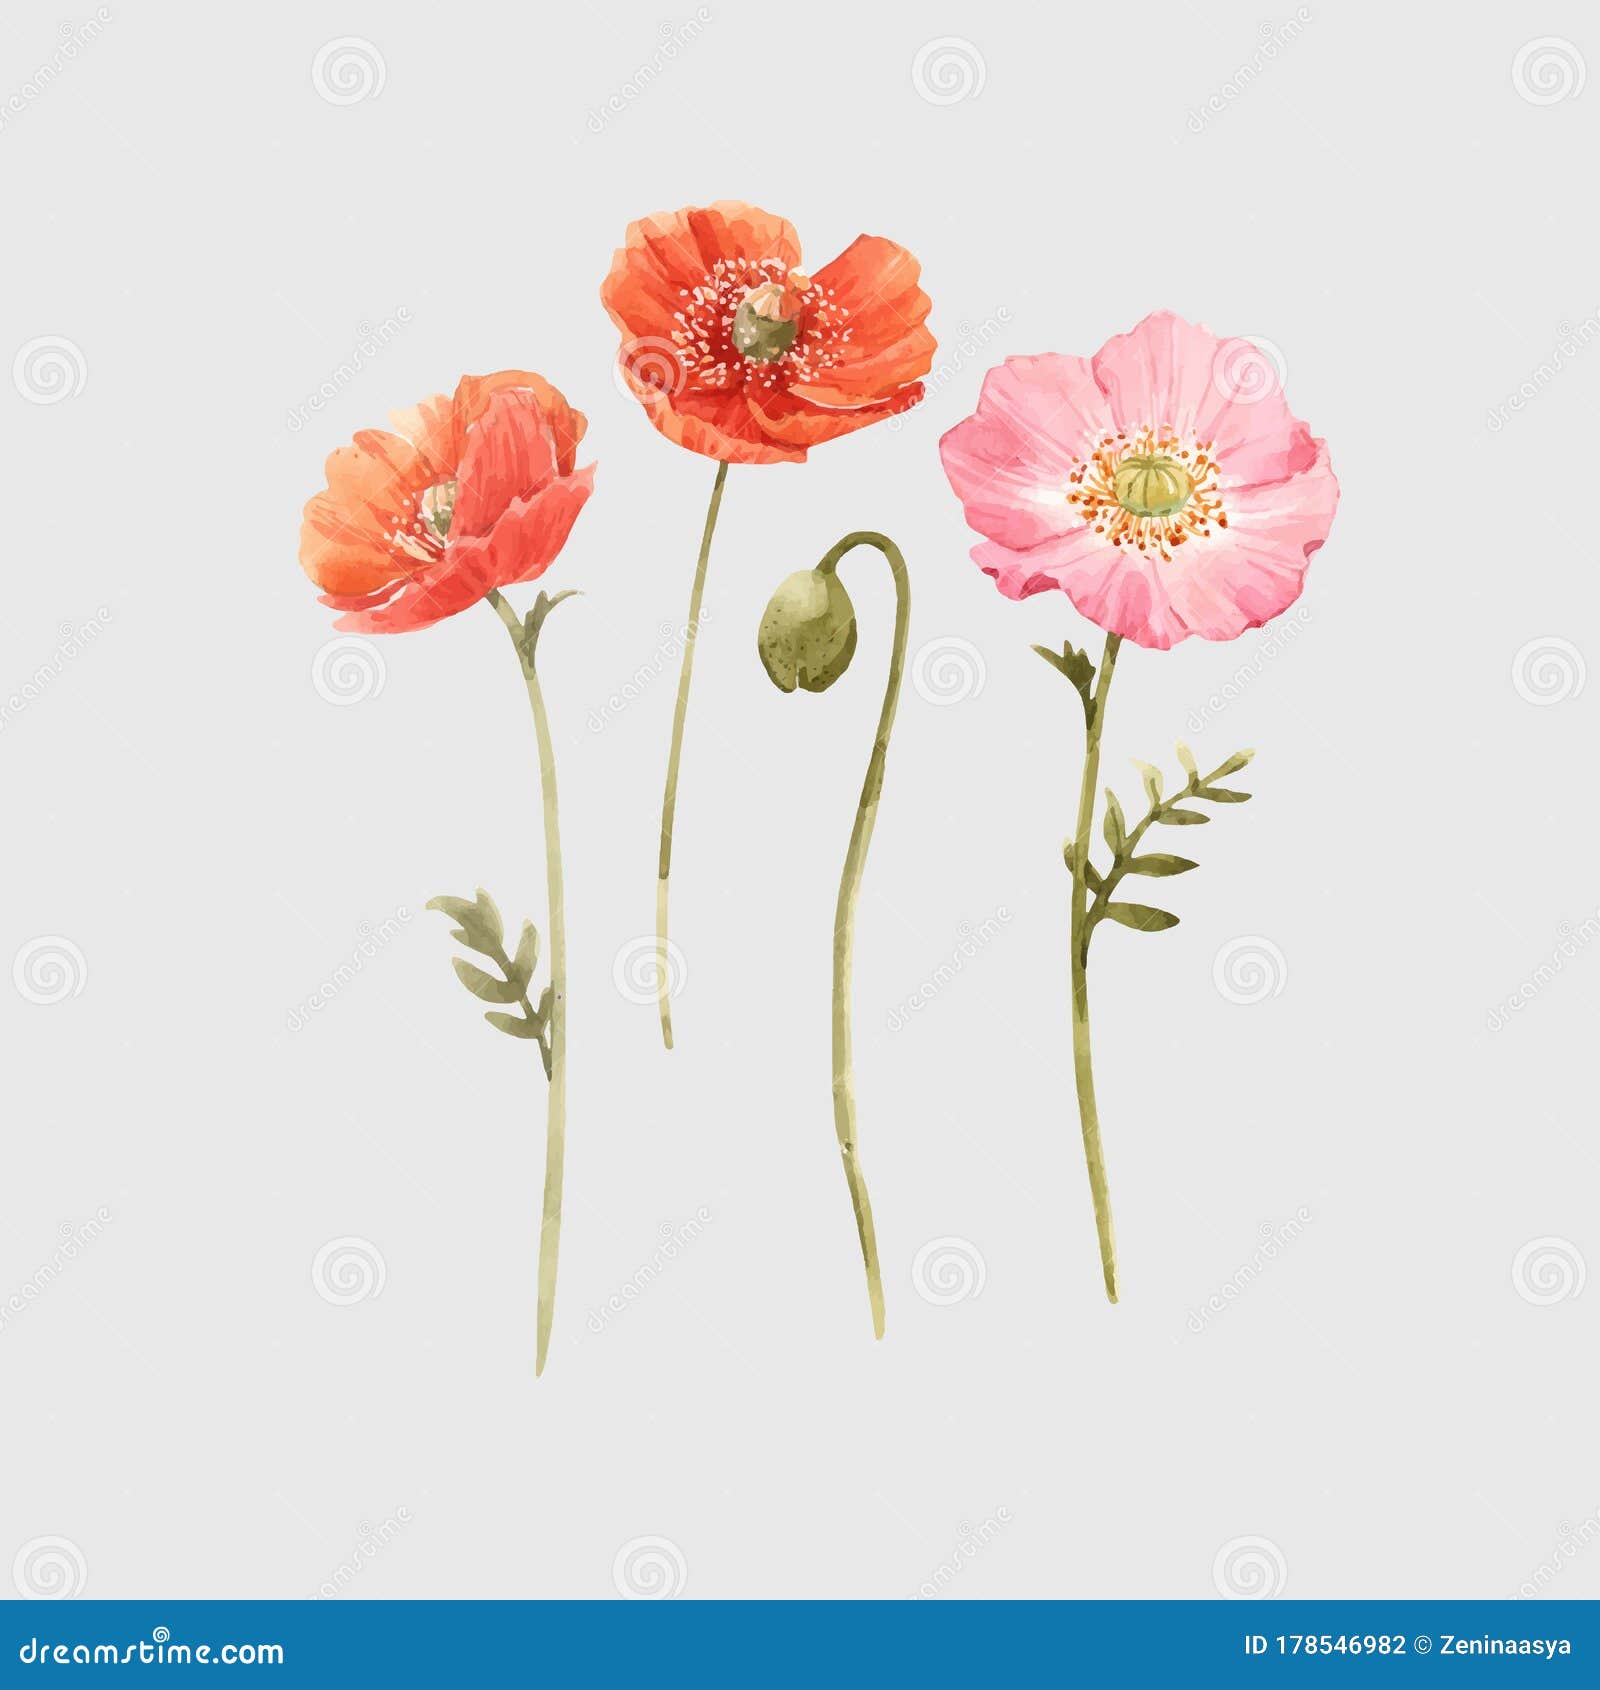 https://thumbs.dreamstime.com/z/beautiful-vector-watercolor-floral-set-red-pink-poppy-flowers-stock-illustration-hand-drawn-178546982.jpg